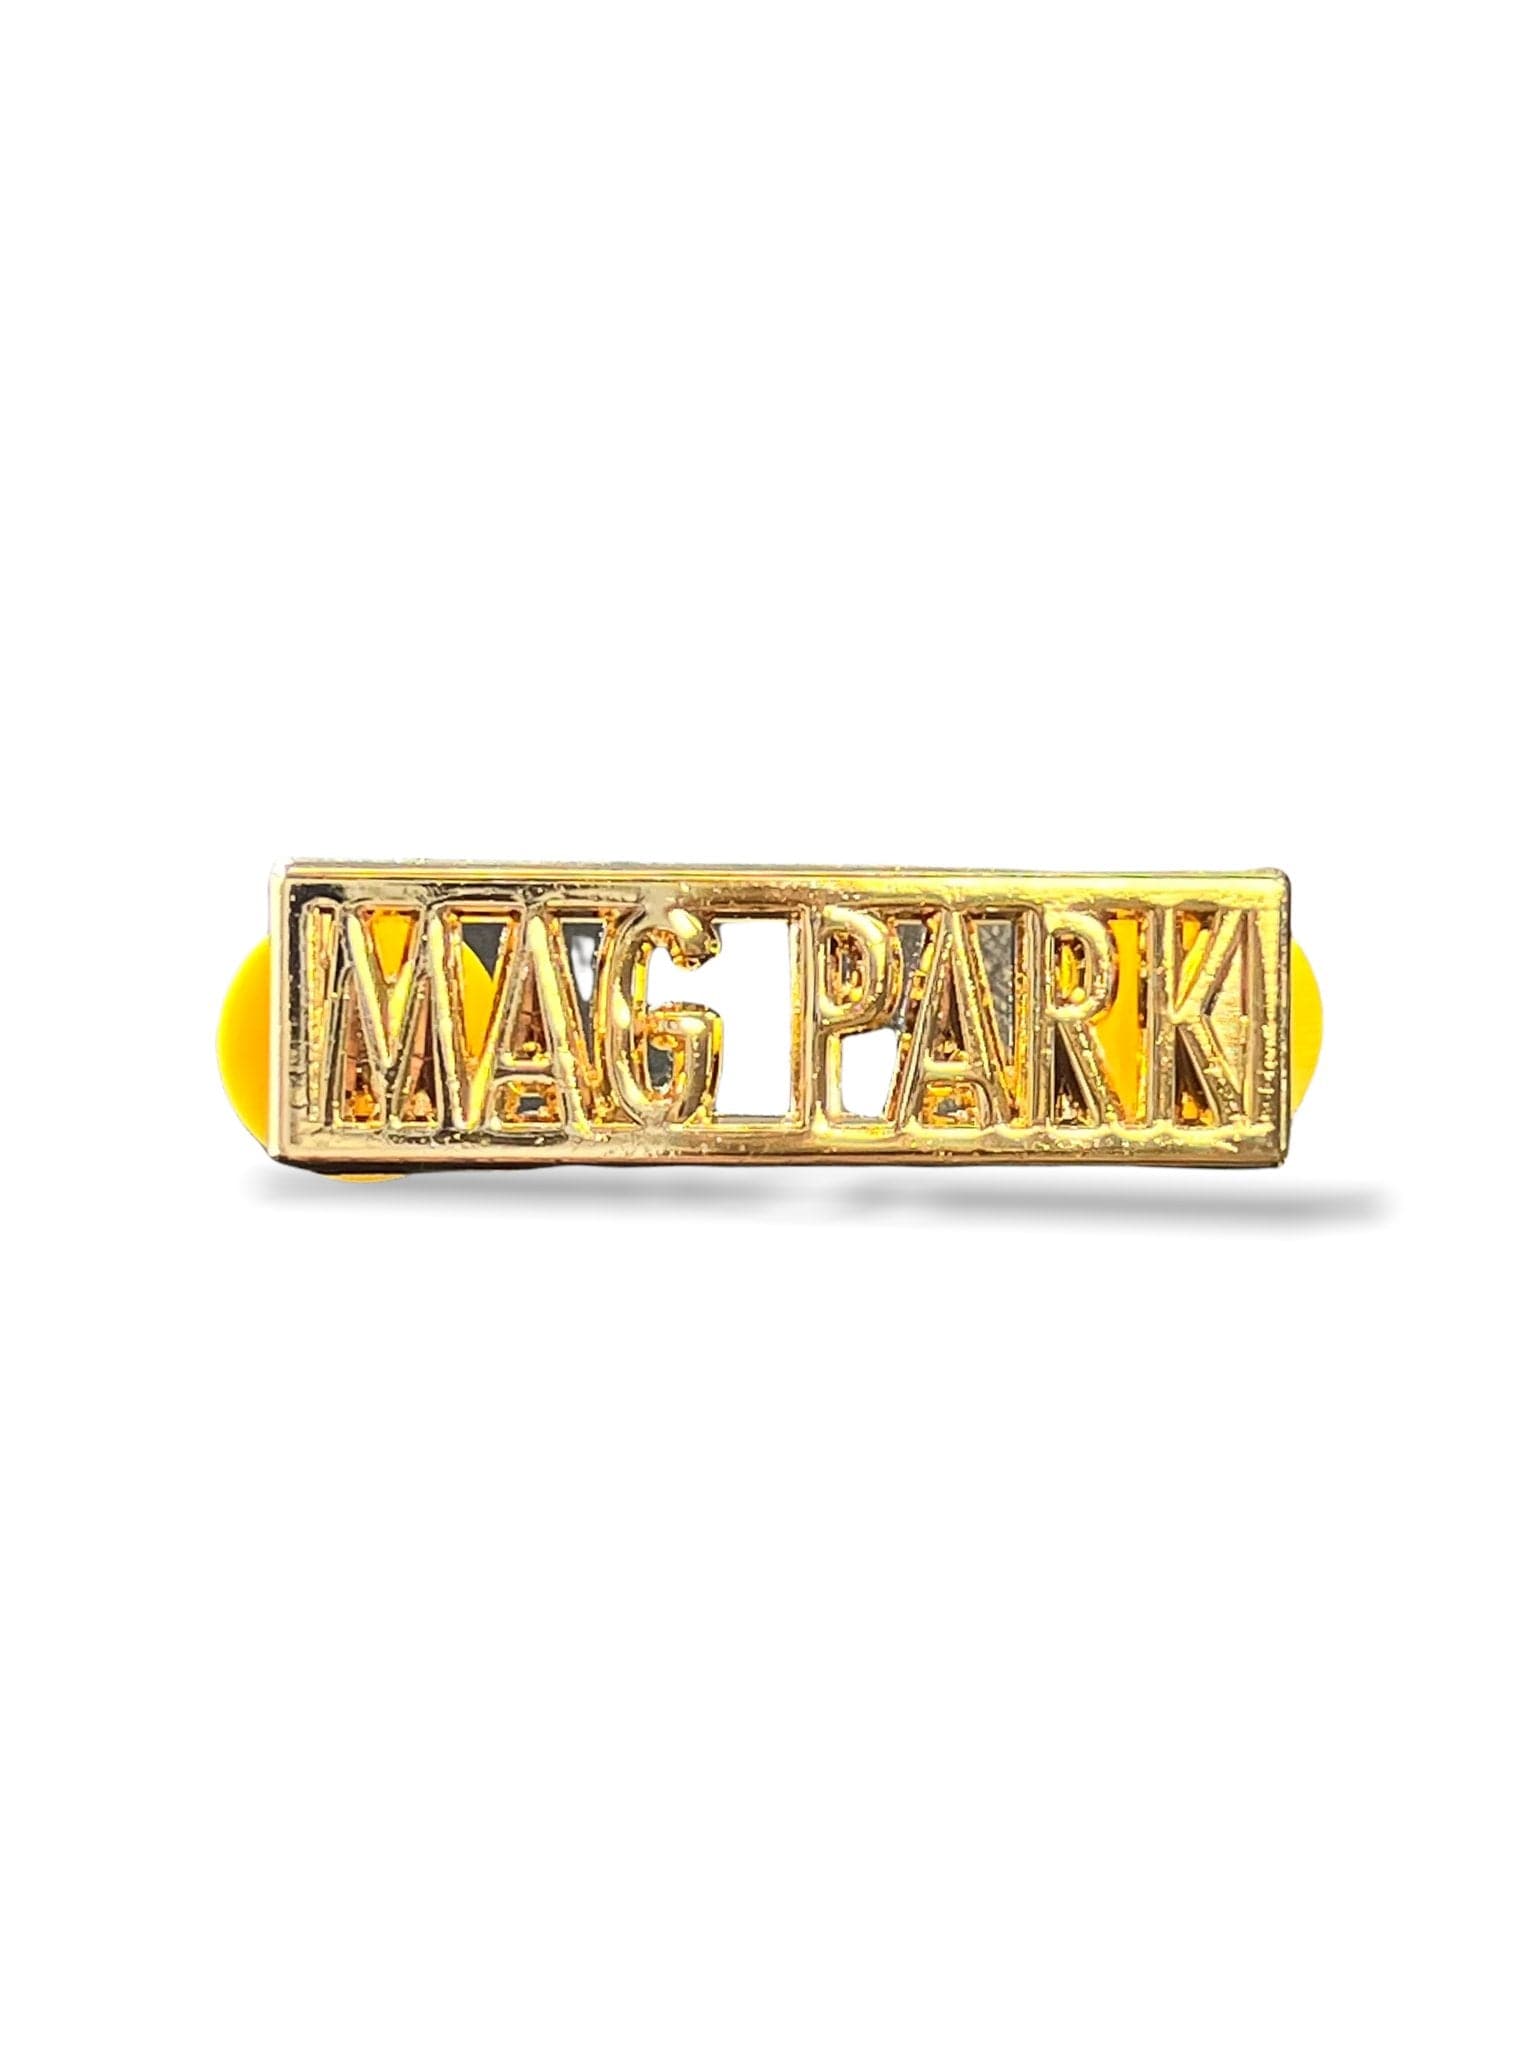 WORLD FAMOUS MAG PARK - LACE LOCK PIN (GOLD) - The Magnolia Park